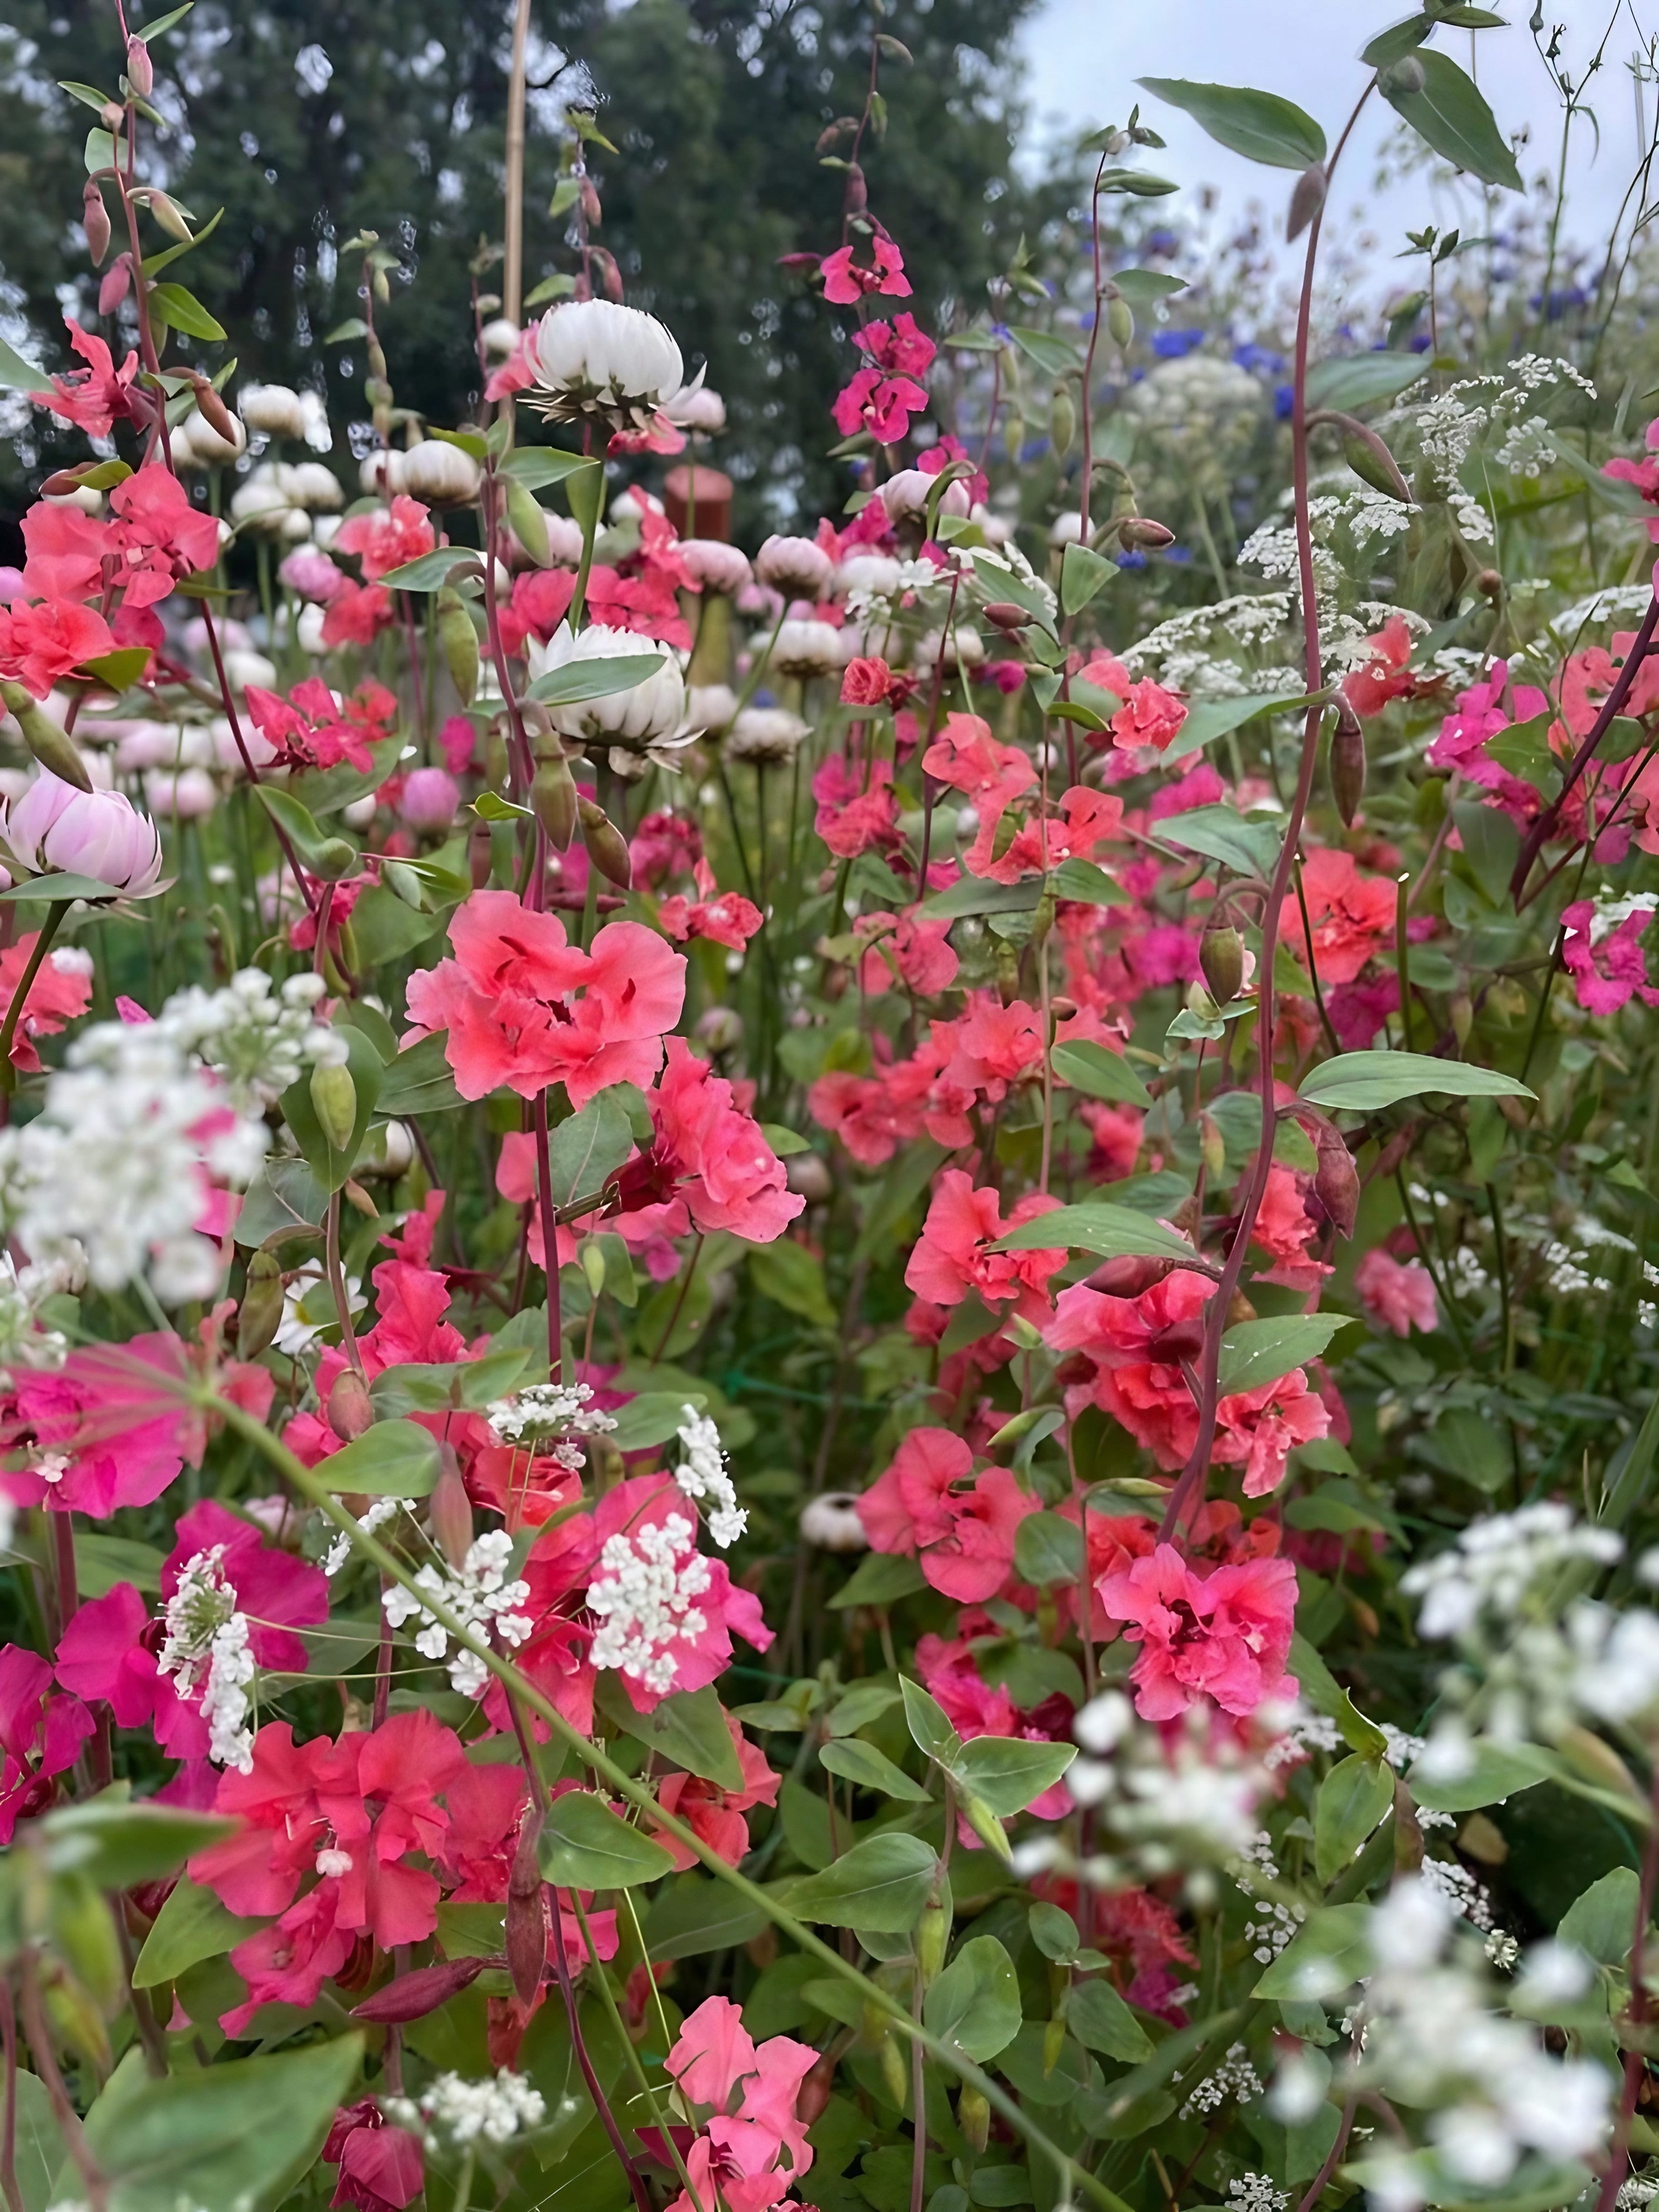 A vibrant display of Clarkia Crown Double Mix in pink and white hues